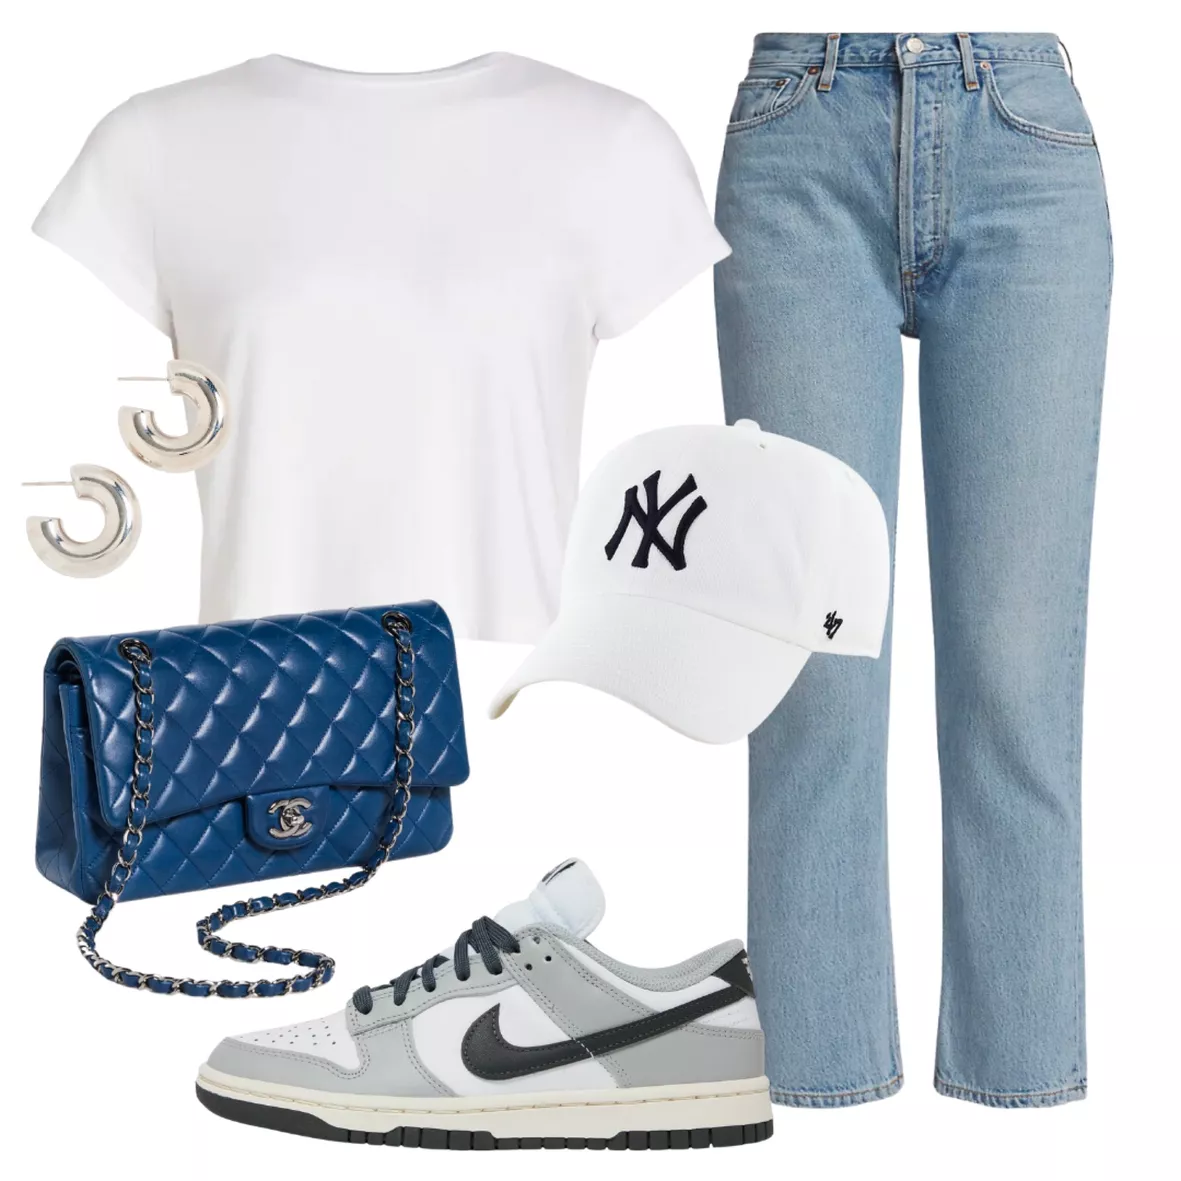 Baseball game outfit #ShopStyle #shopthelook #SummerStyle #landscapedesign